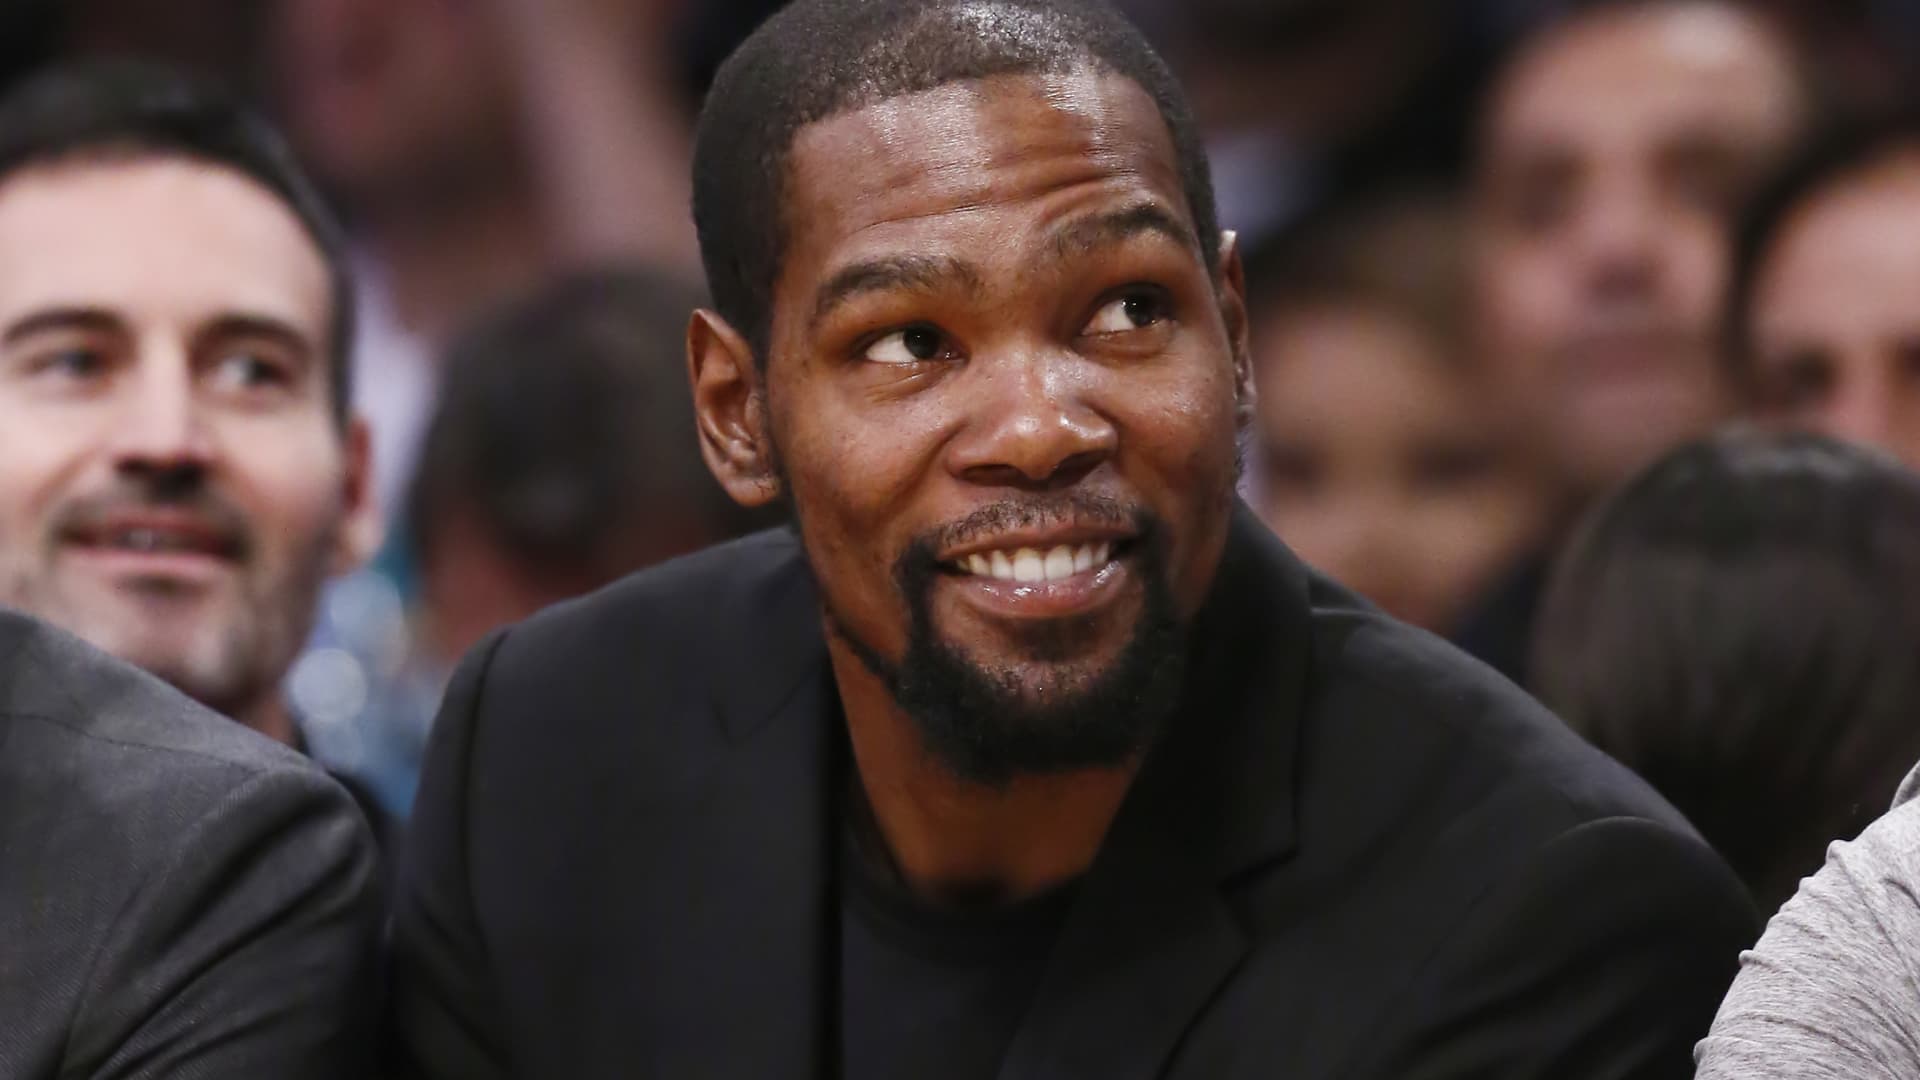 Kevin Durant looks on during a game at the Staples Center on March 10, 2020 in Los Angeles, CA.